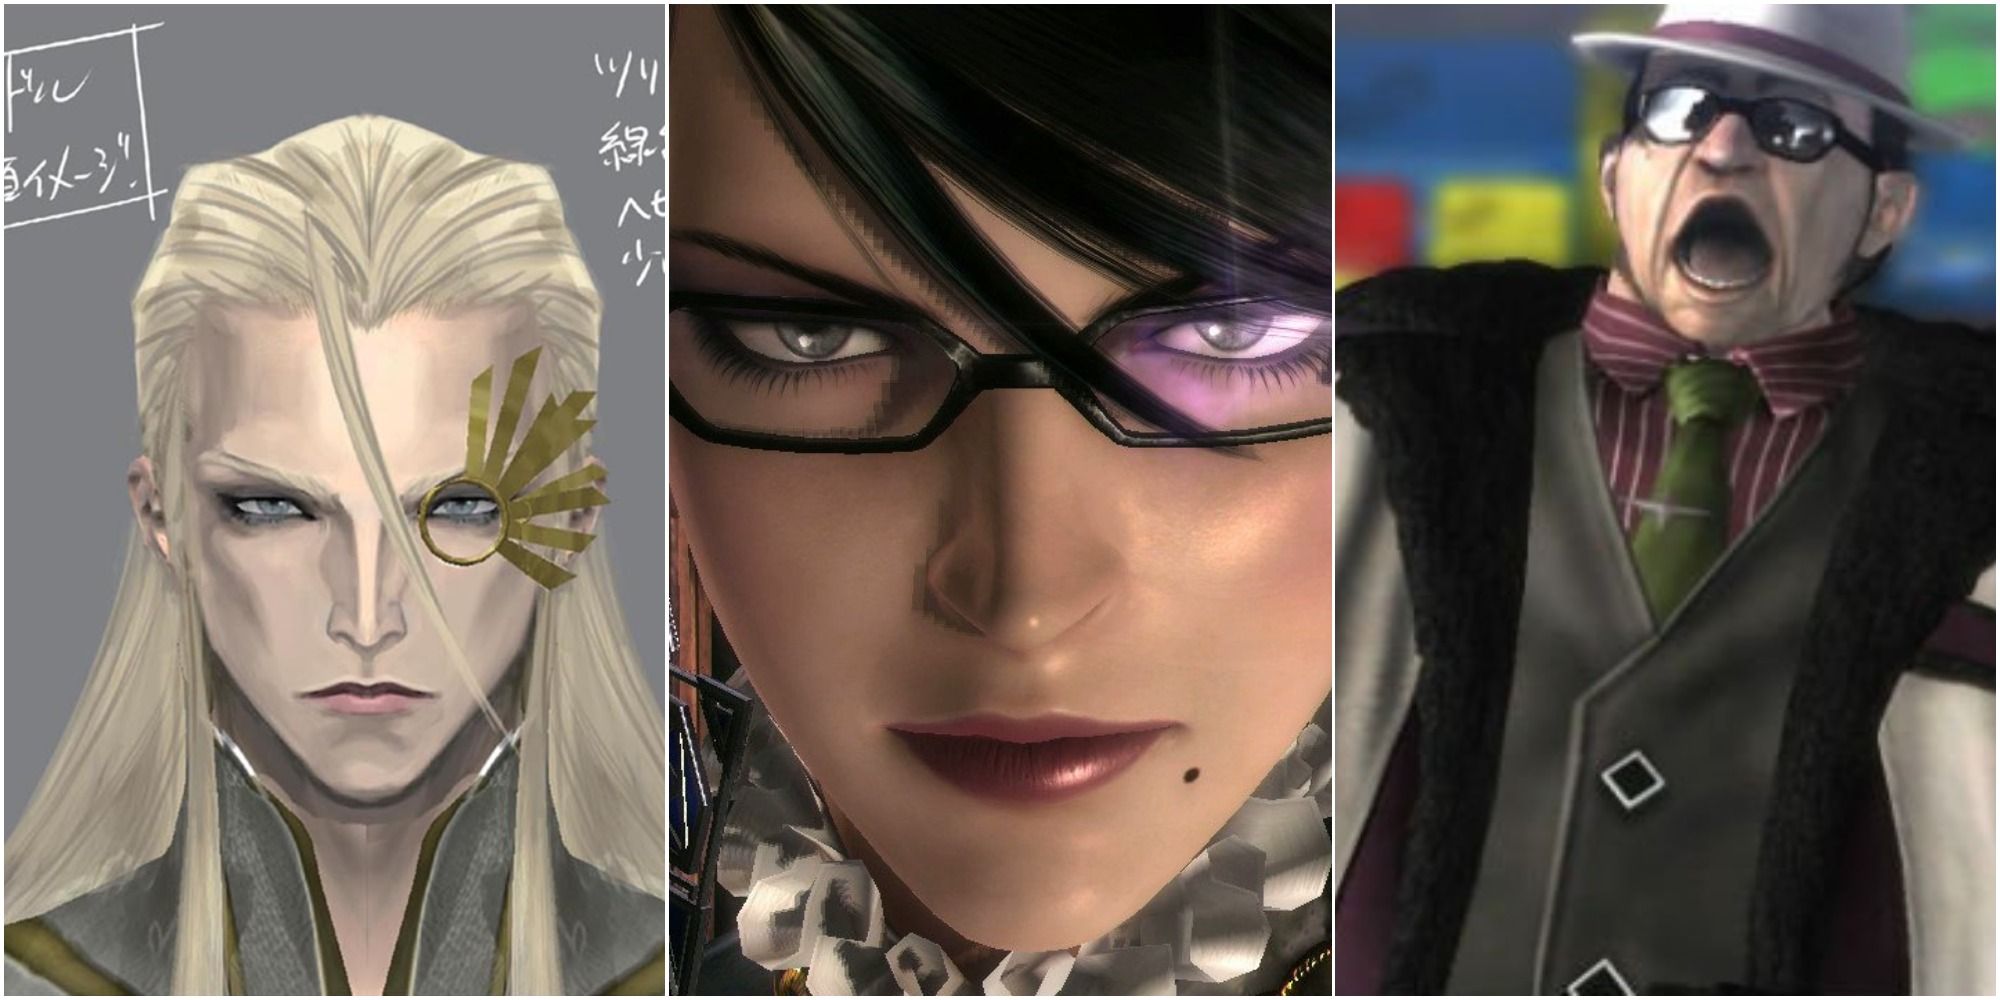 Bayonetta characters with glasses. Balder concept art, Bayonetta up close looking forward, and Enzo in a state of shock in the city